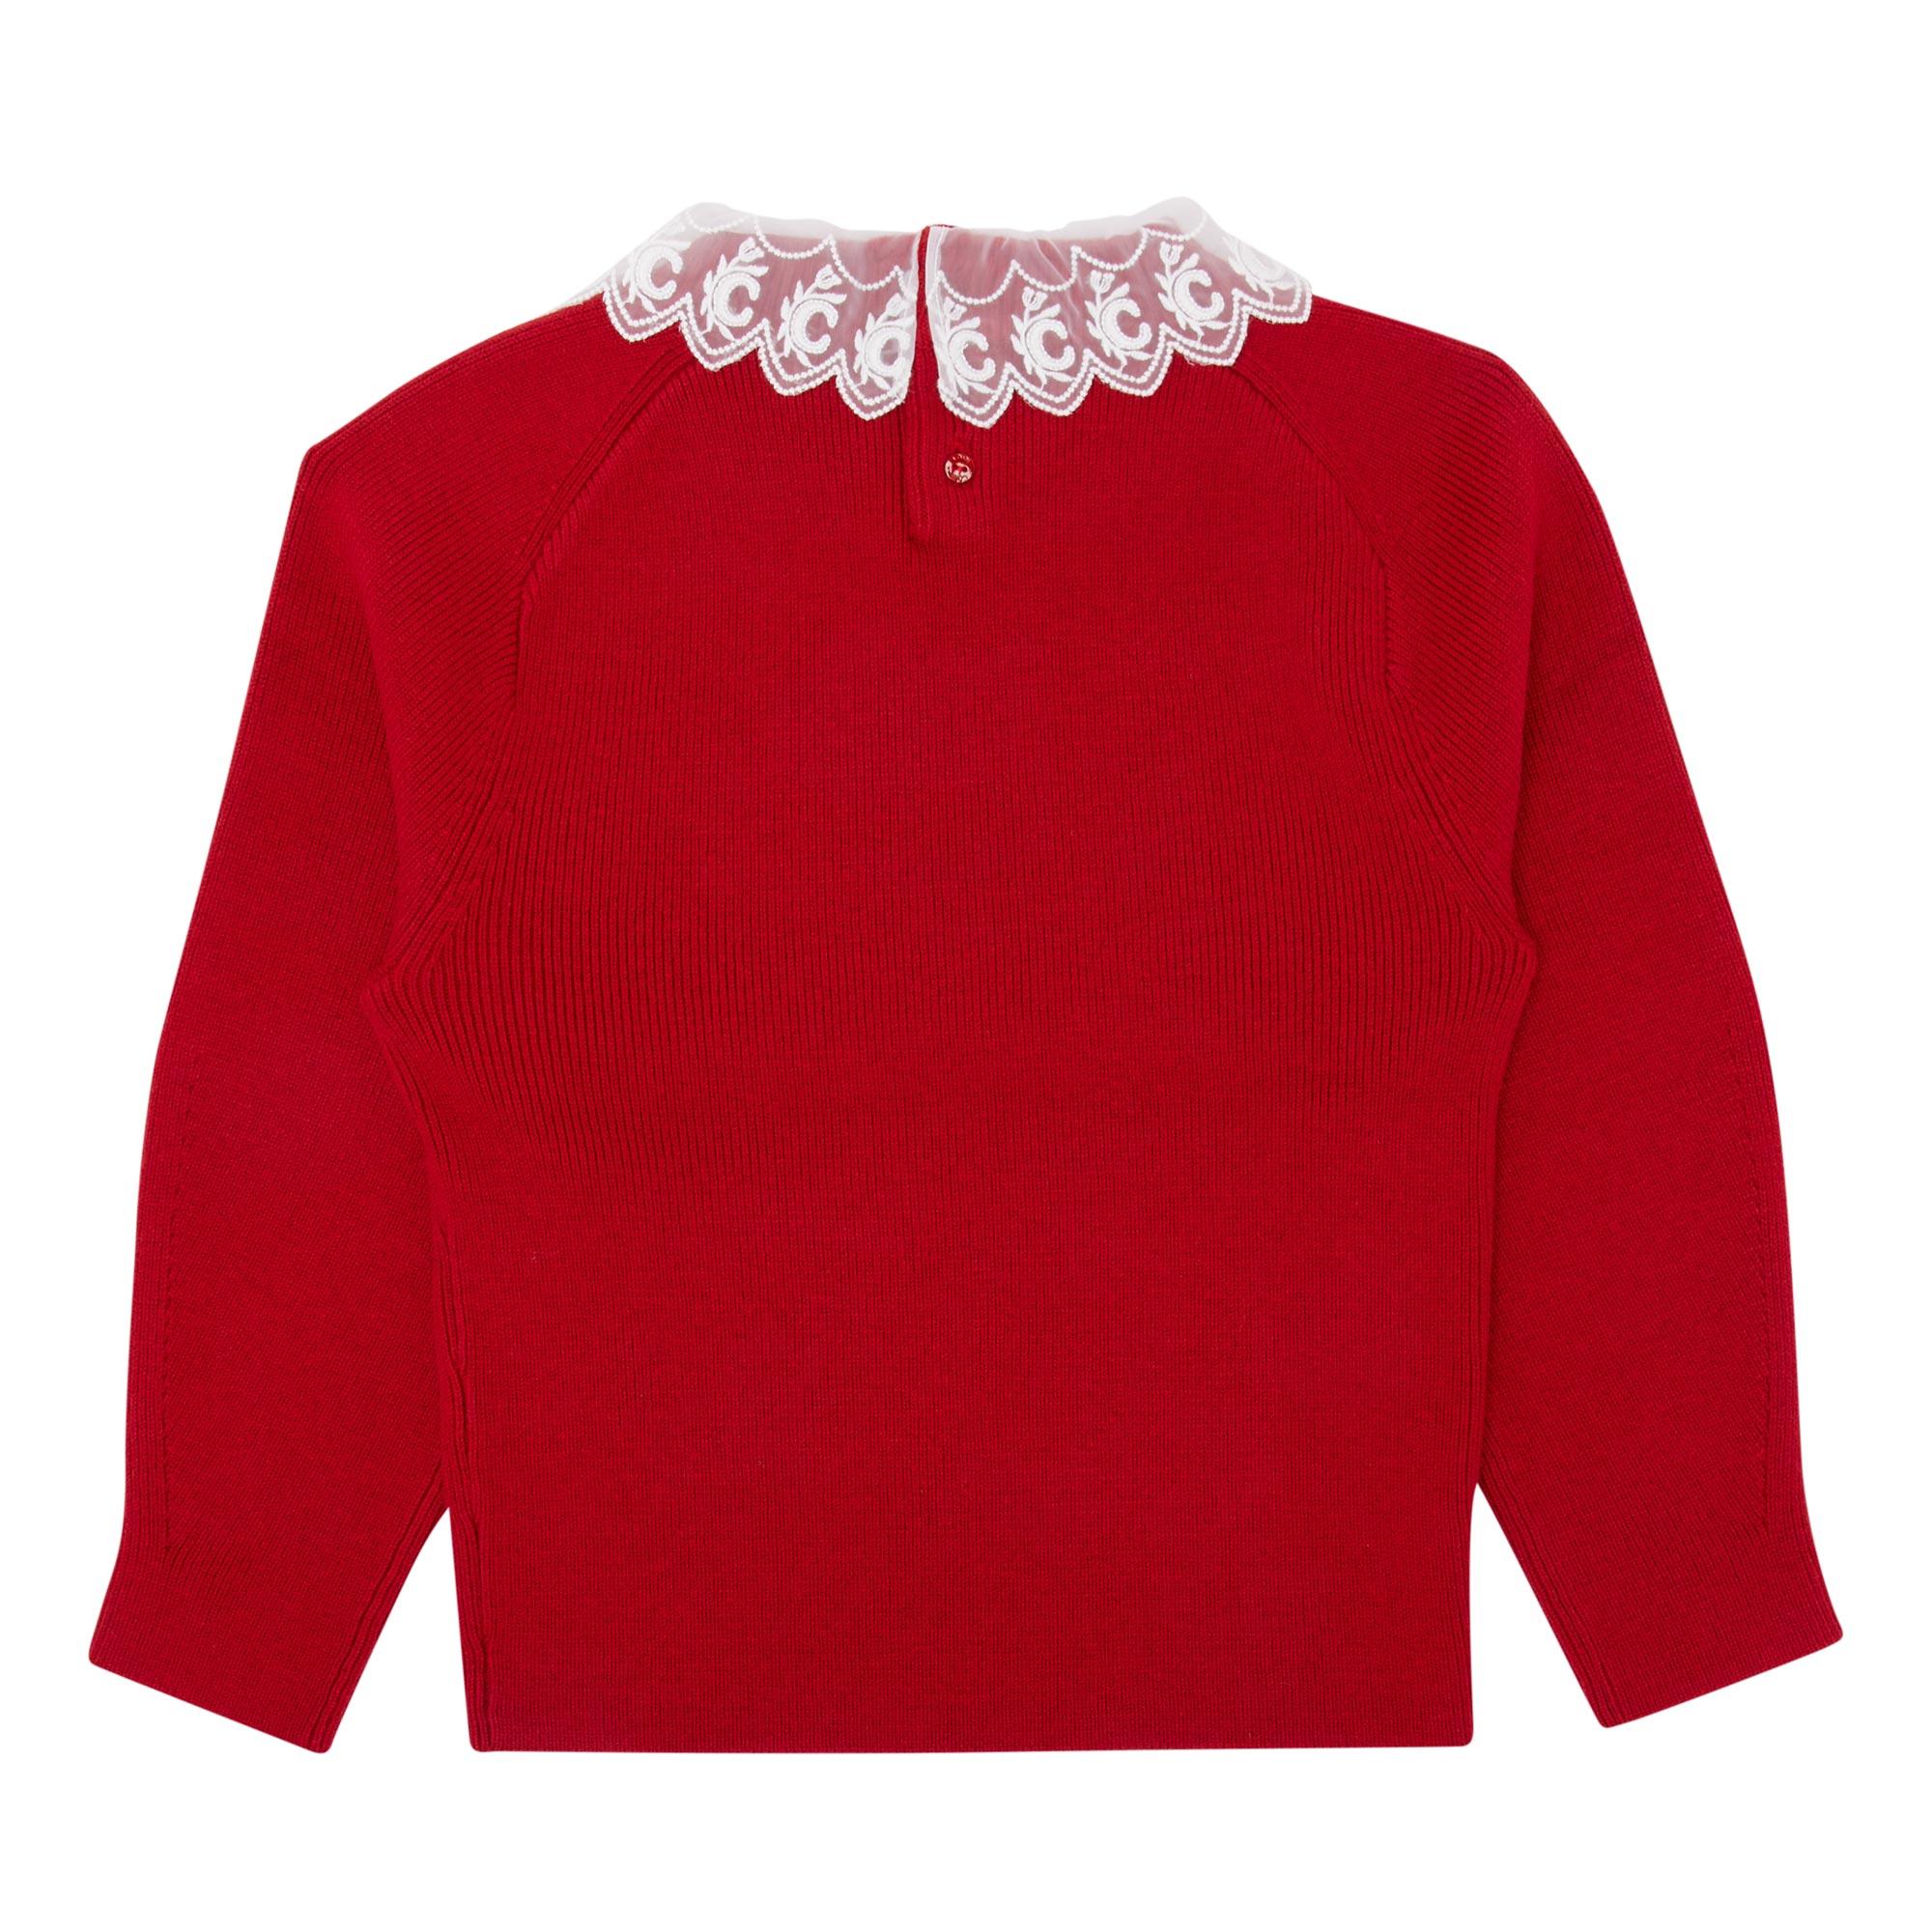 Lace Neckline Knitted Sweater